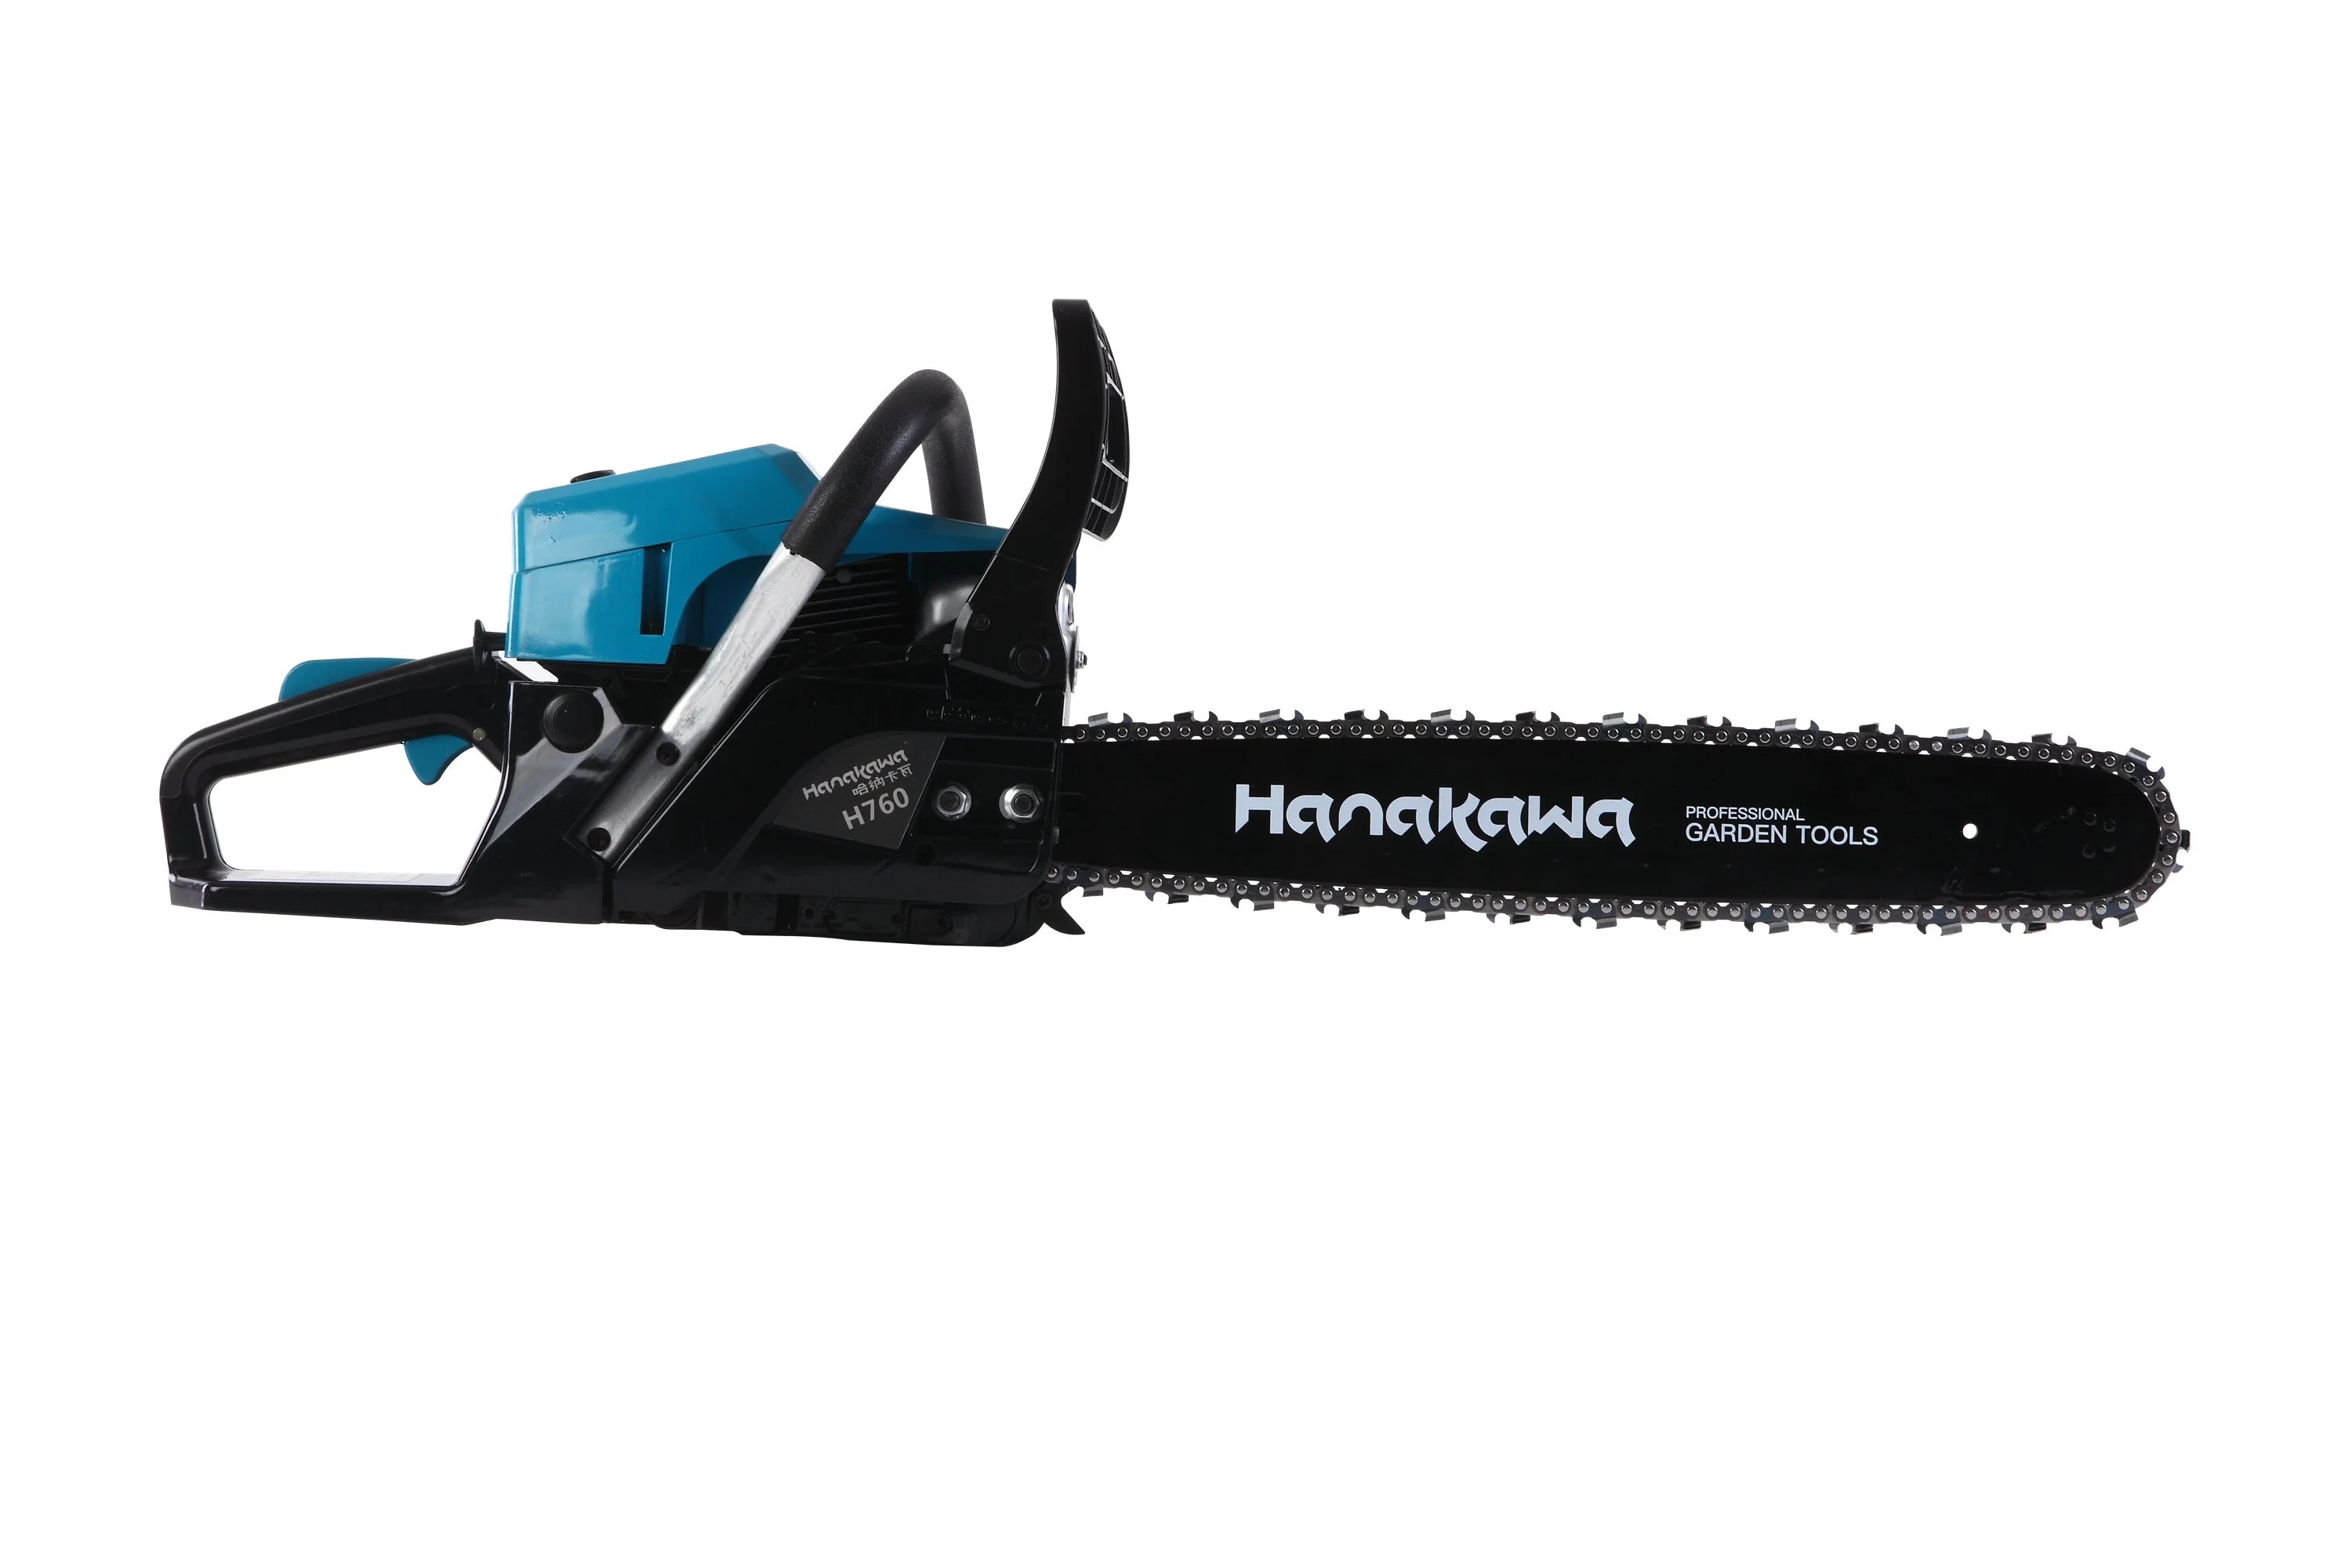 3hanakawa The Best Chainsaw Brands H760 (60) 55.6cc 2-Stroke Most Powerful Chainsaw Buy Rollomatic Bar Length (inch) 18" 20" Optional